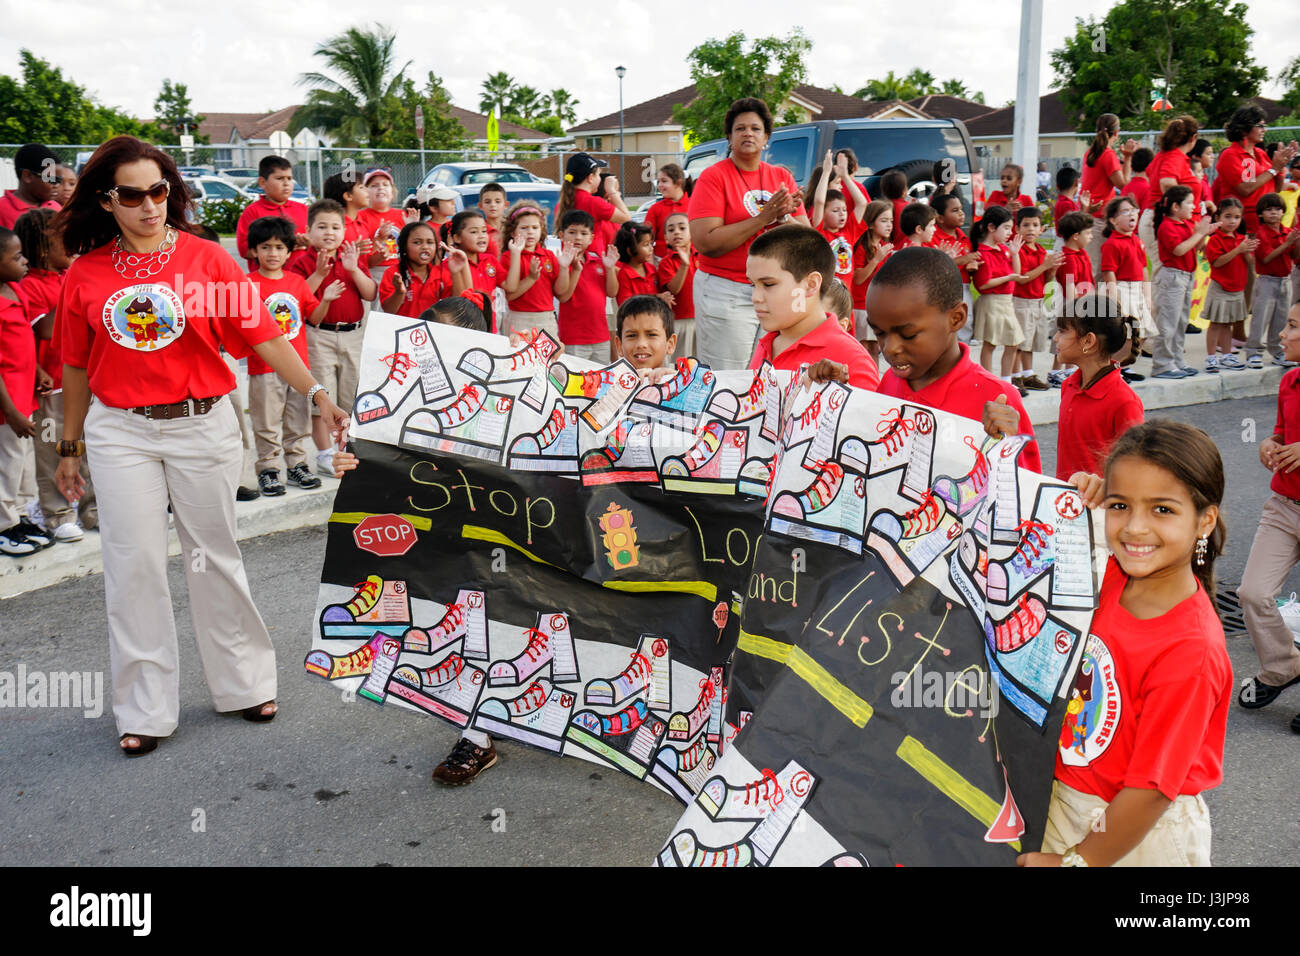 Miami Florida,Spanish Lake Elementary School,International Walk to School Day,student students education pupil youth,safety poster contest,parade,Hisp Stock Photo